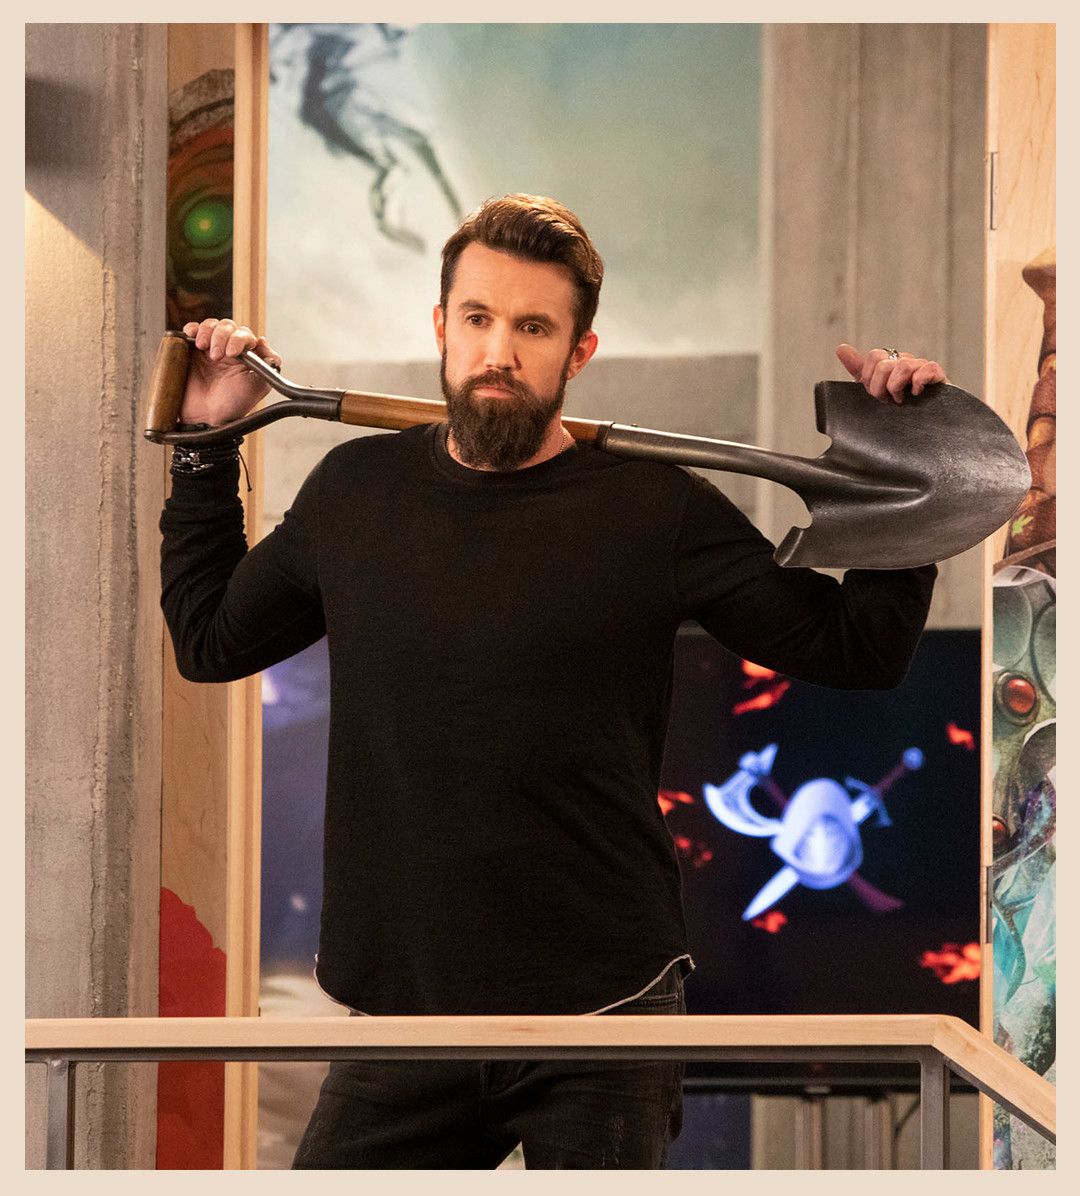 It's Always Sunny' creator Rob McElhenney finally gets his moment